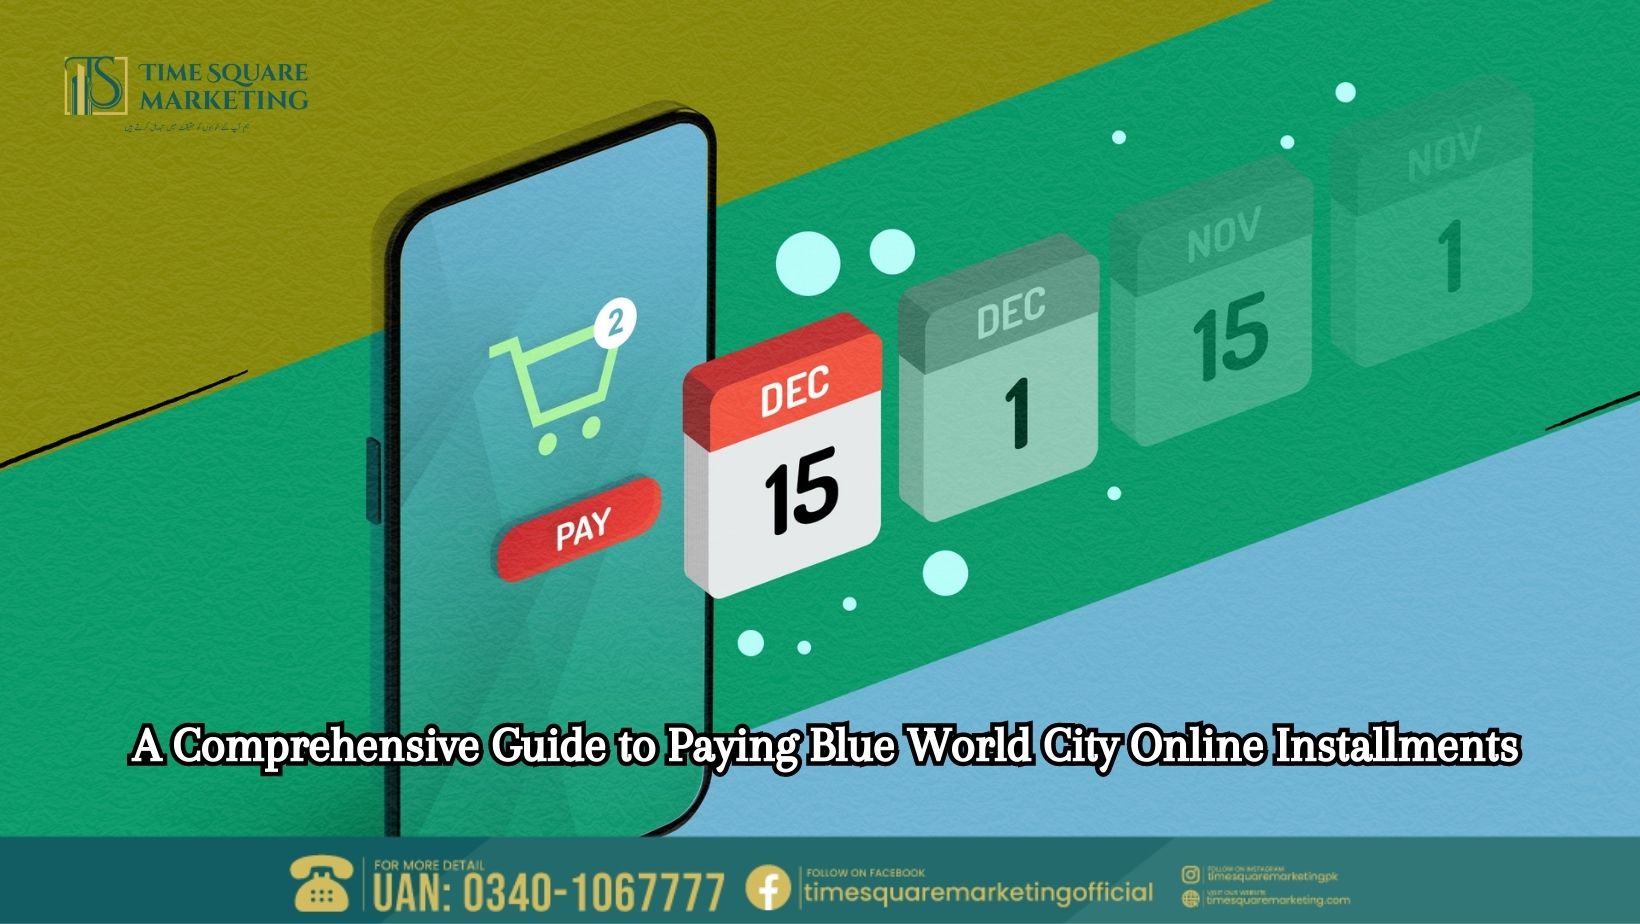 A Comprehensive Guide to Paying Blue World City Online Installments